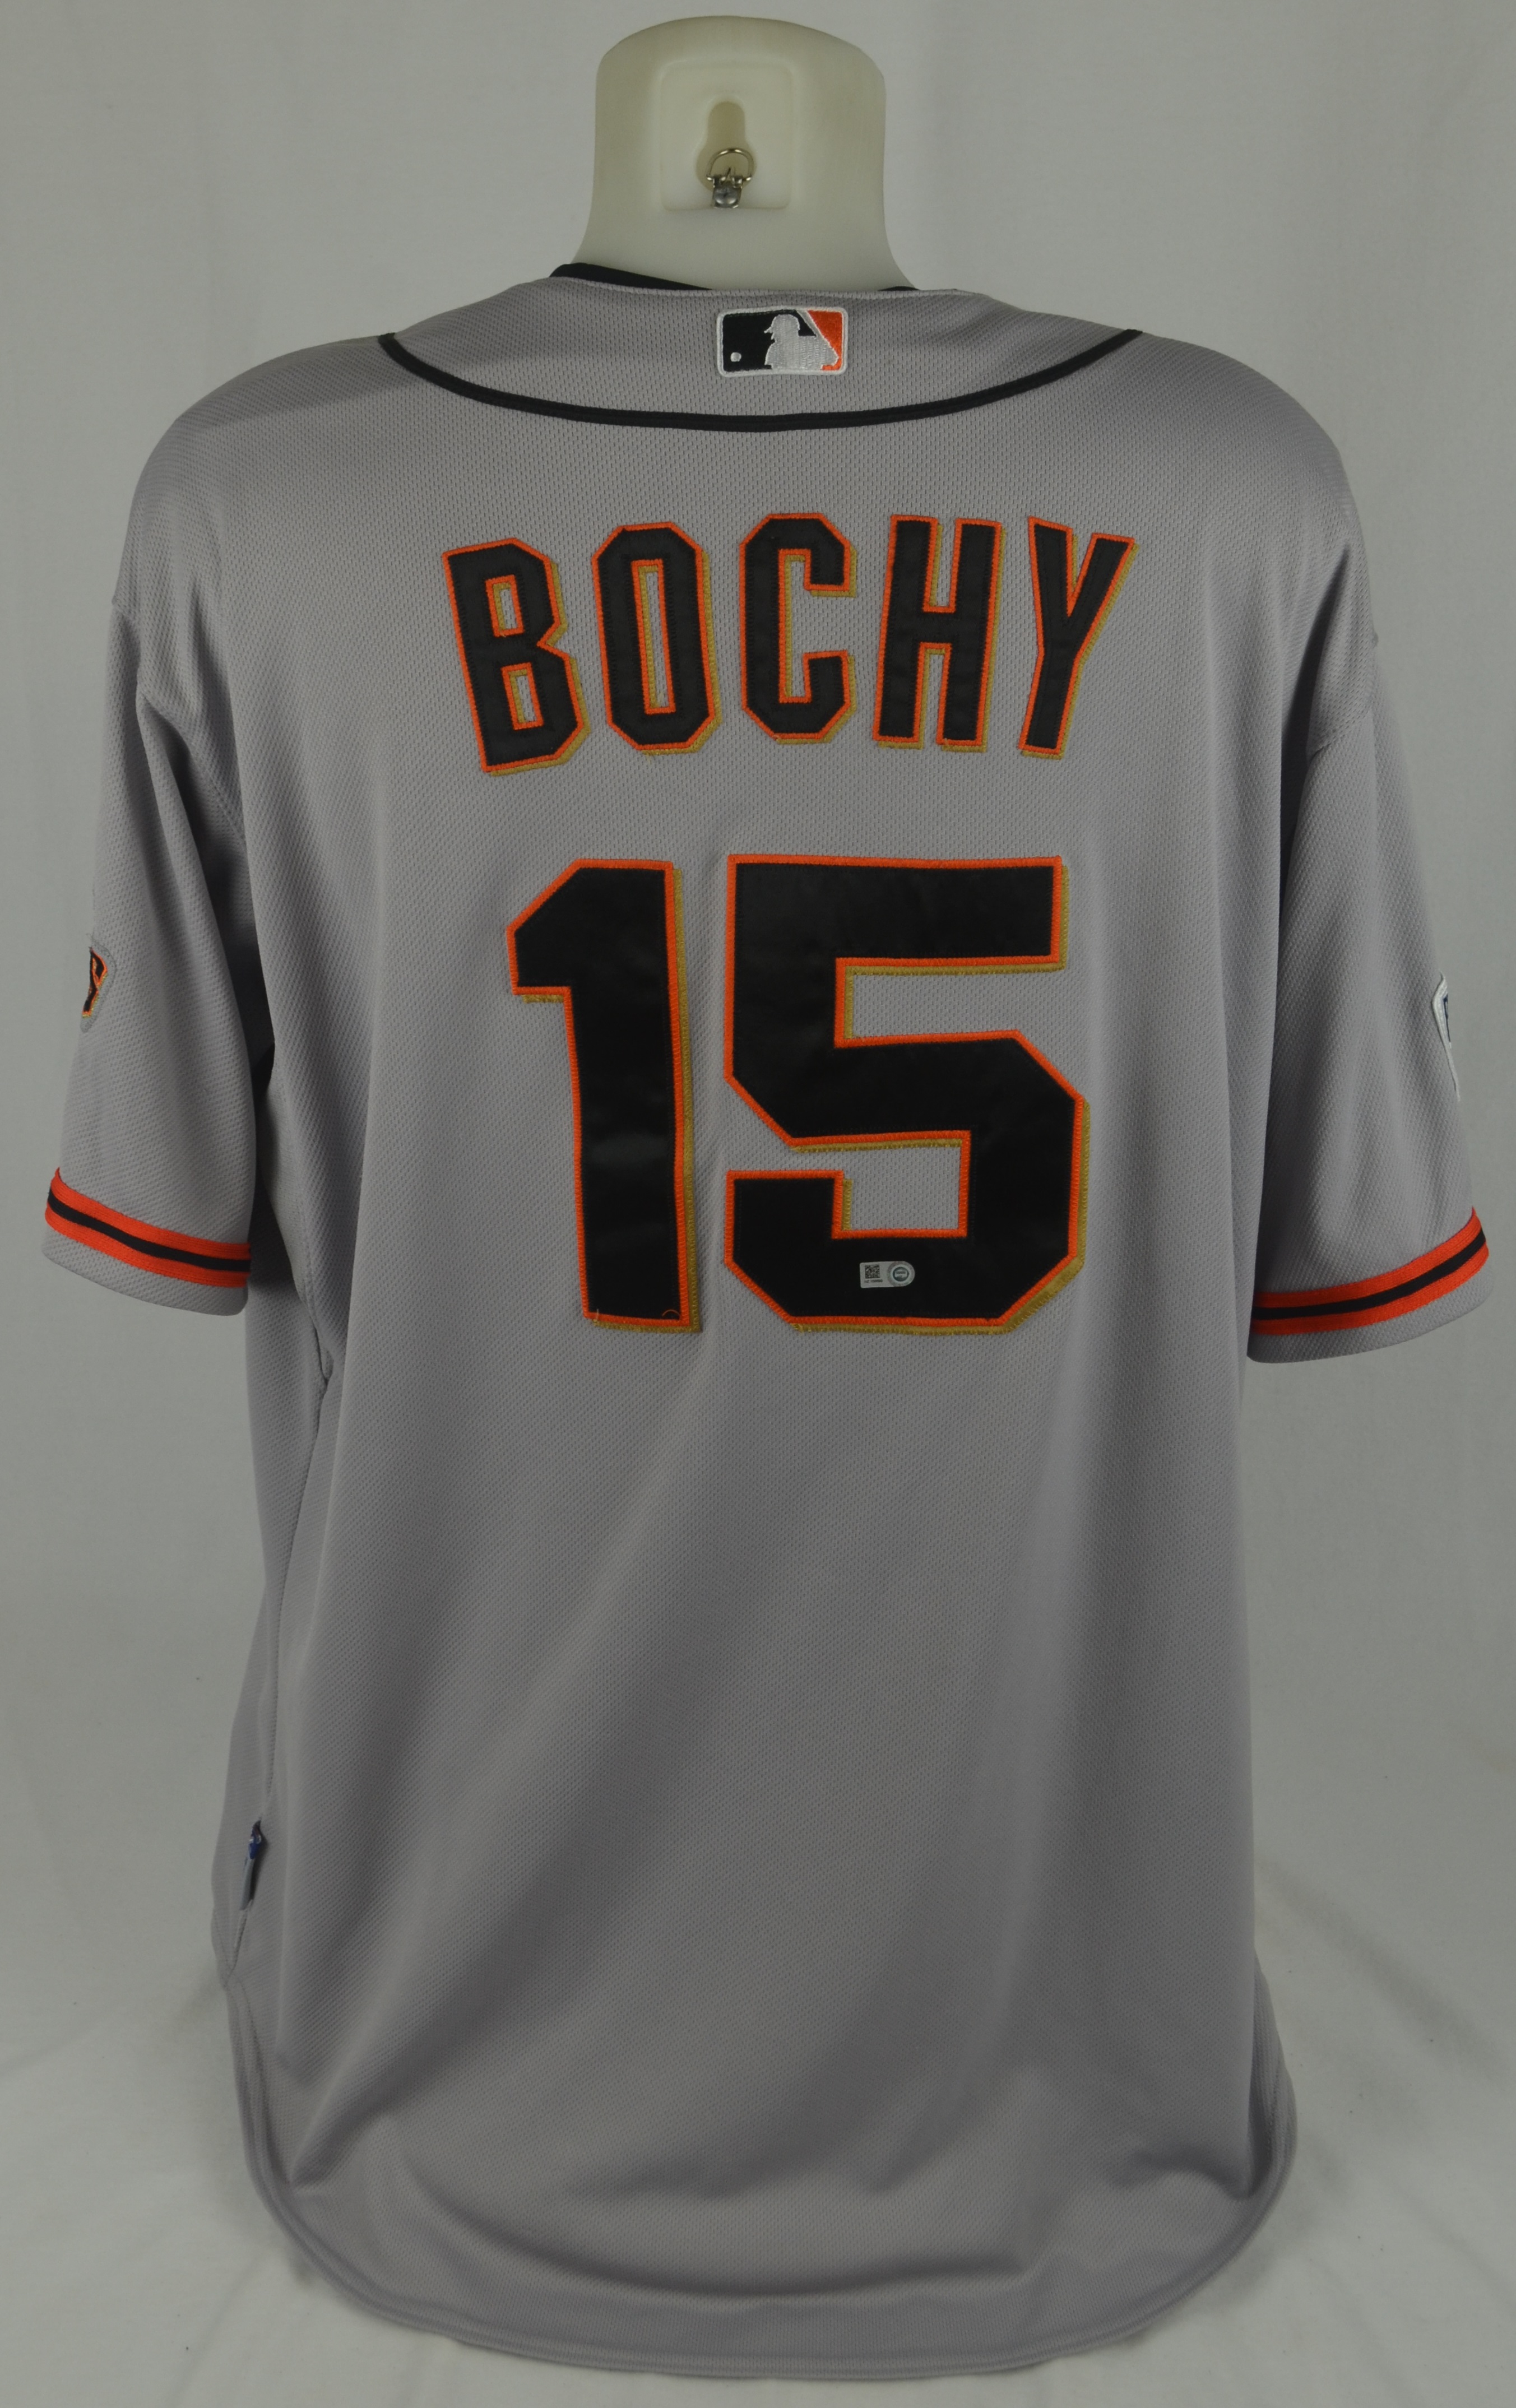 San Francisco Giants World Series Auction: 2014 Game-Used World